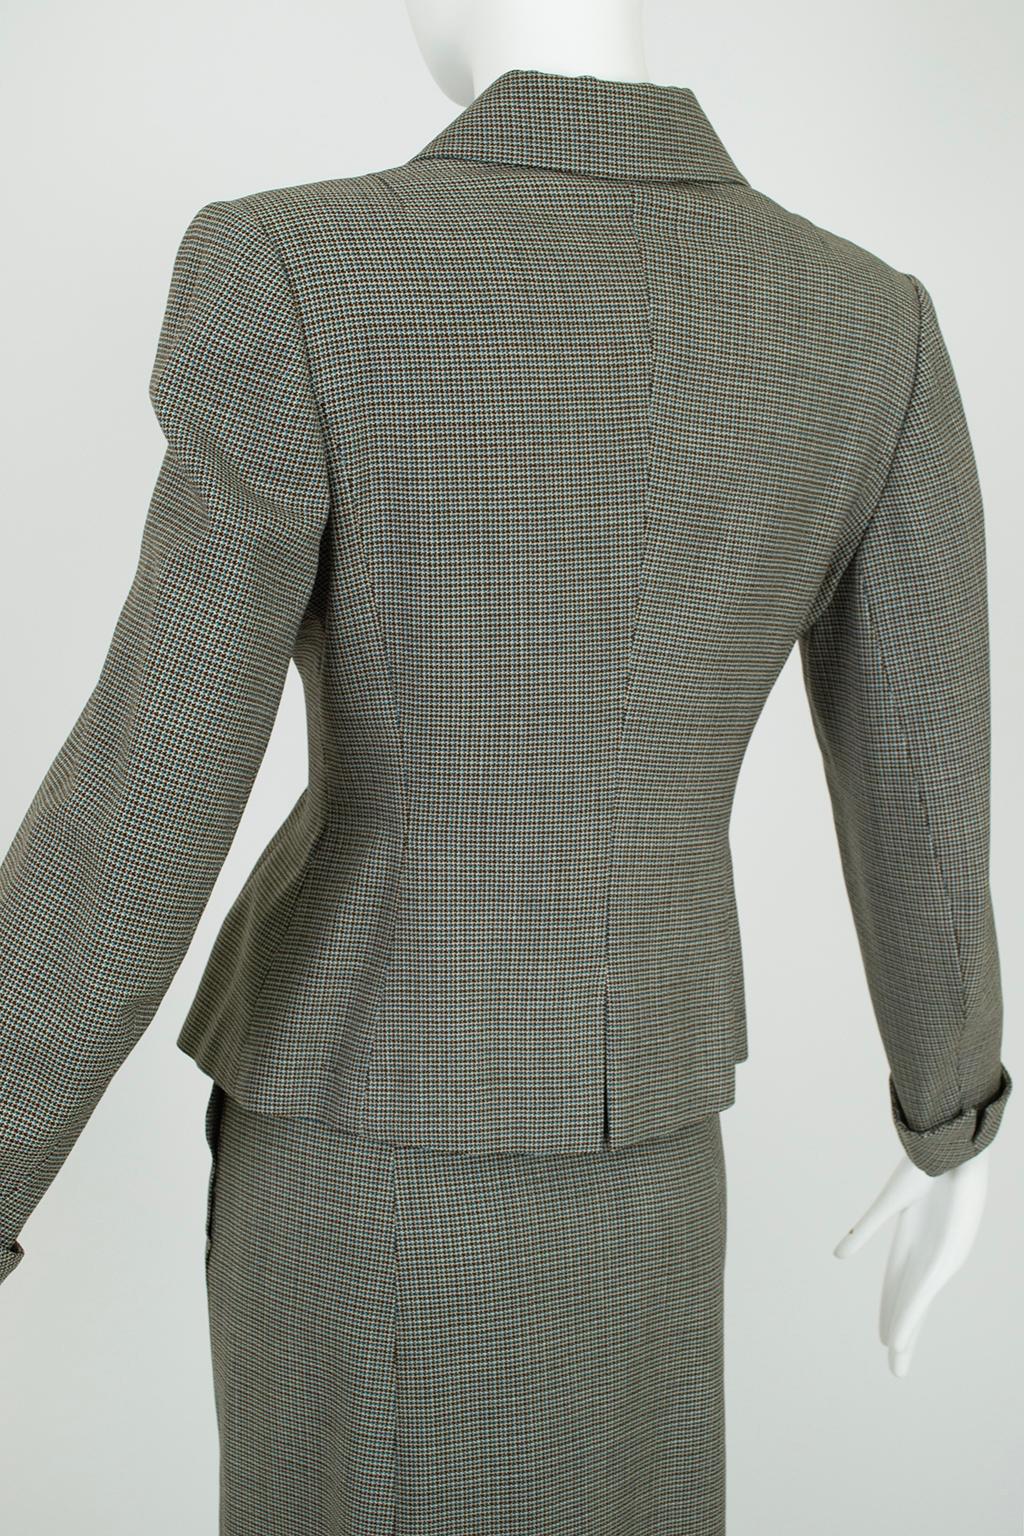 French Blue and Brown Houndstooth Cutaway Suit with Novelty Buttons – S-M, 1940s For Sale 6